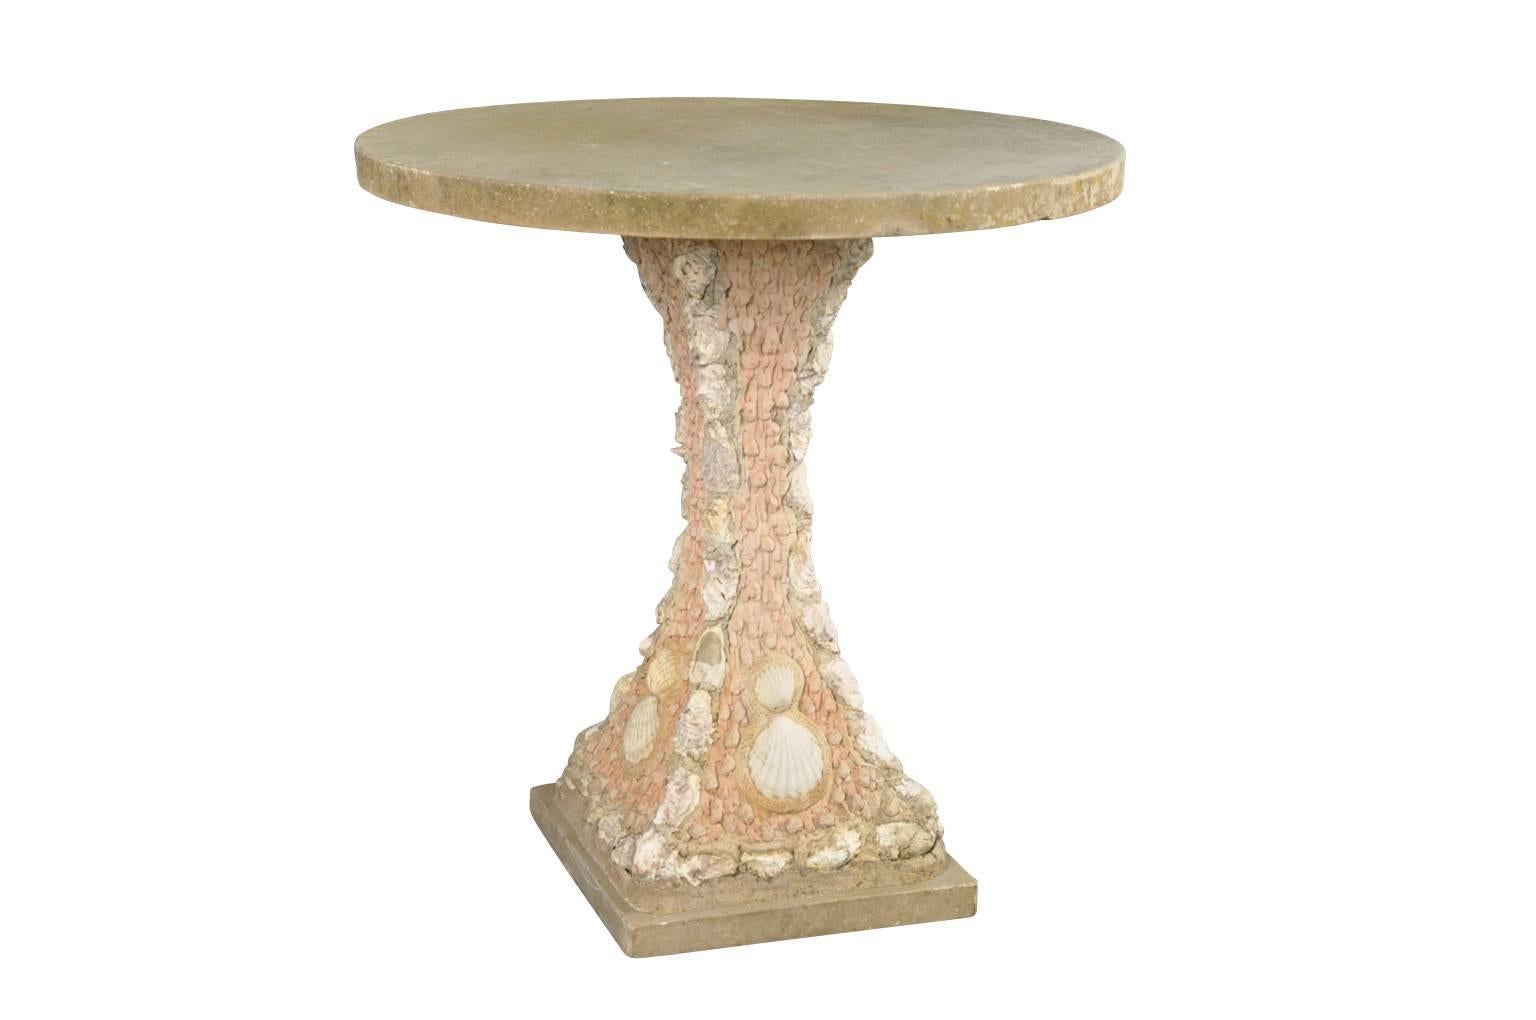 A sensational vintage French garden table with a shell motif. Wonderfully constructed with a coade stone base decorated with sea shells and a stone top. A terrific piece for any garden or interior.